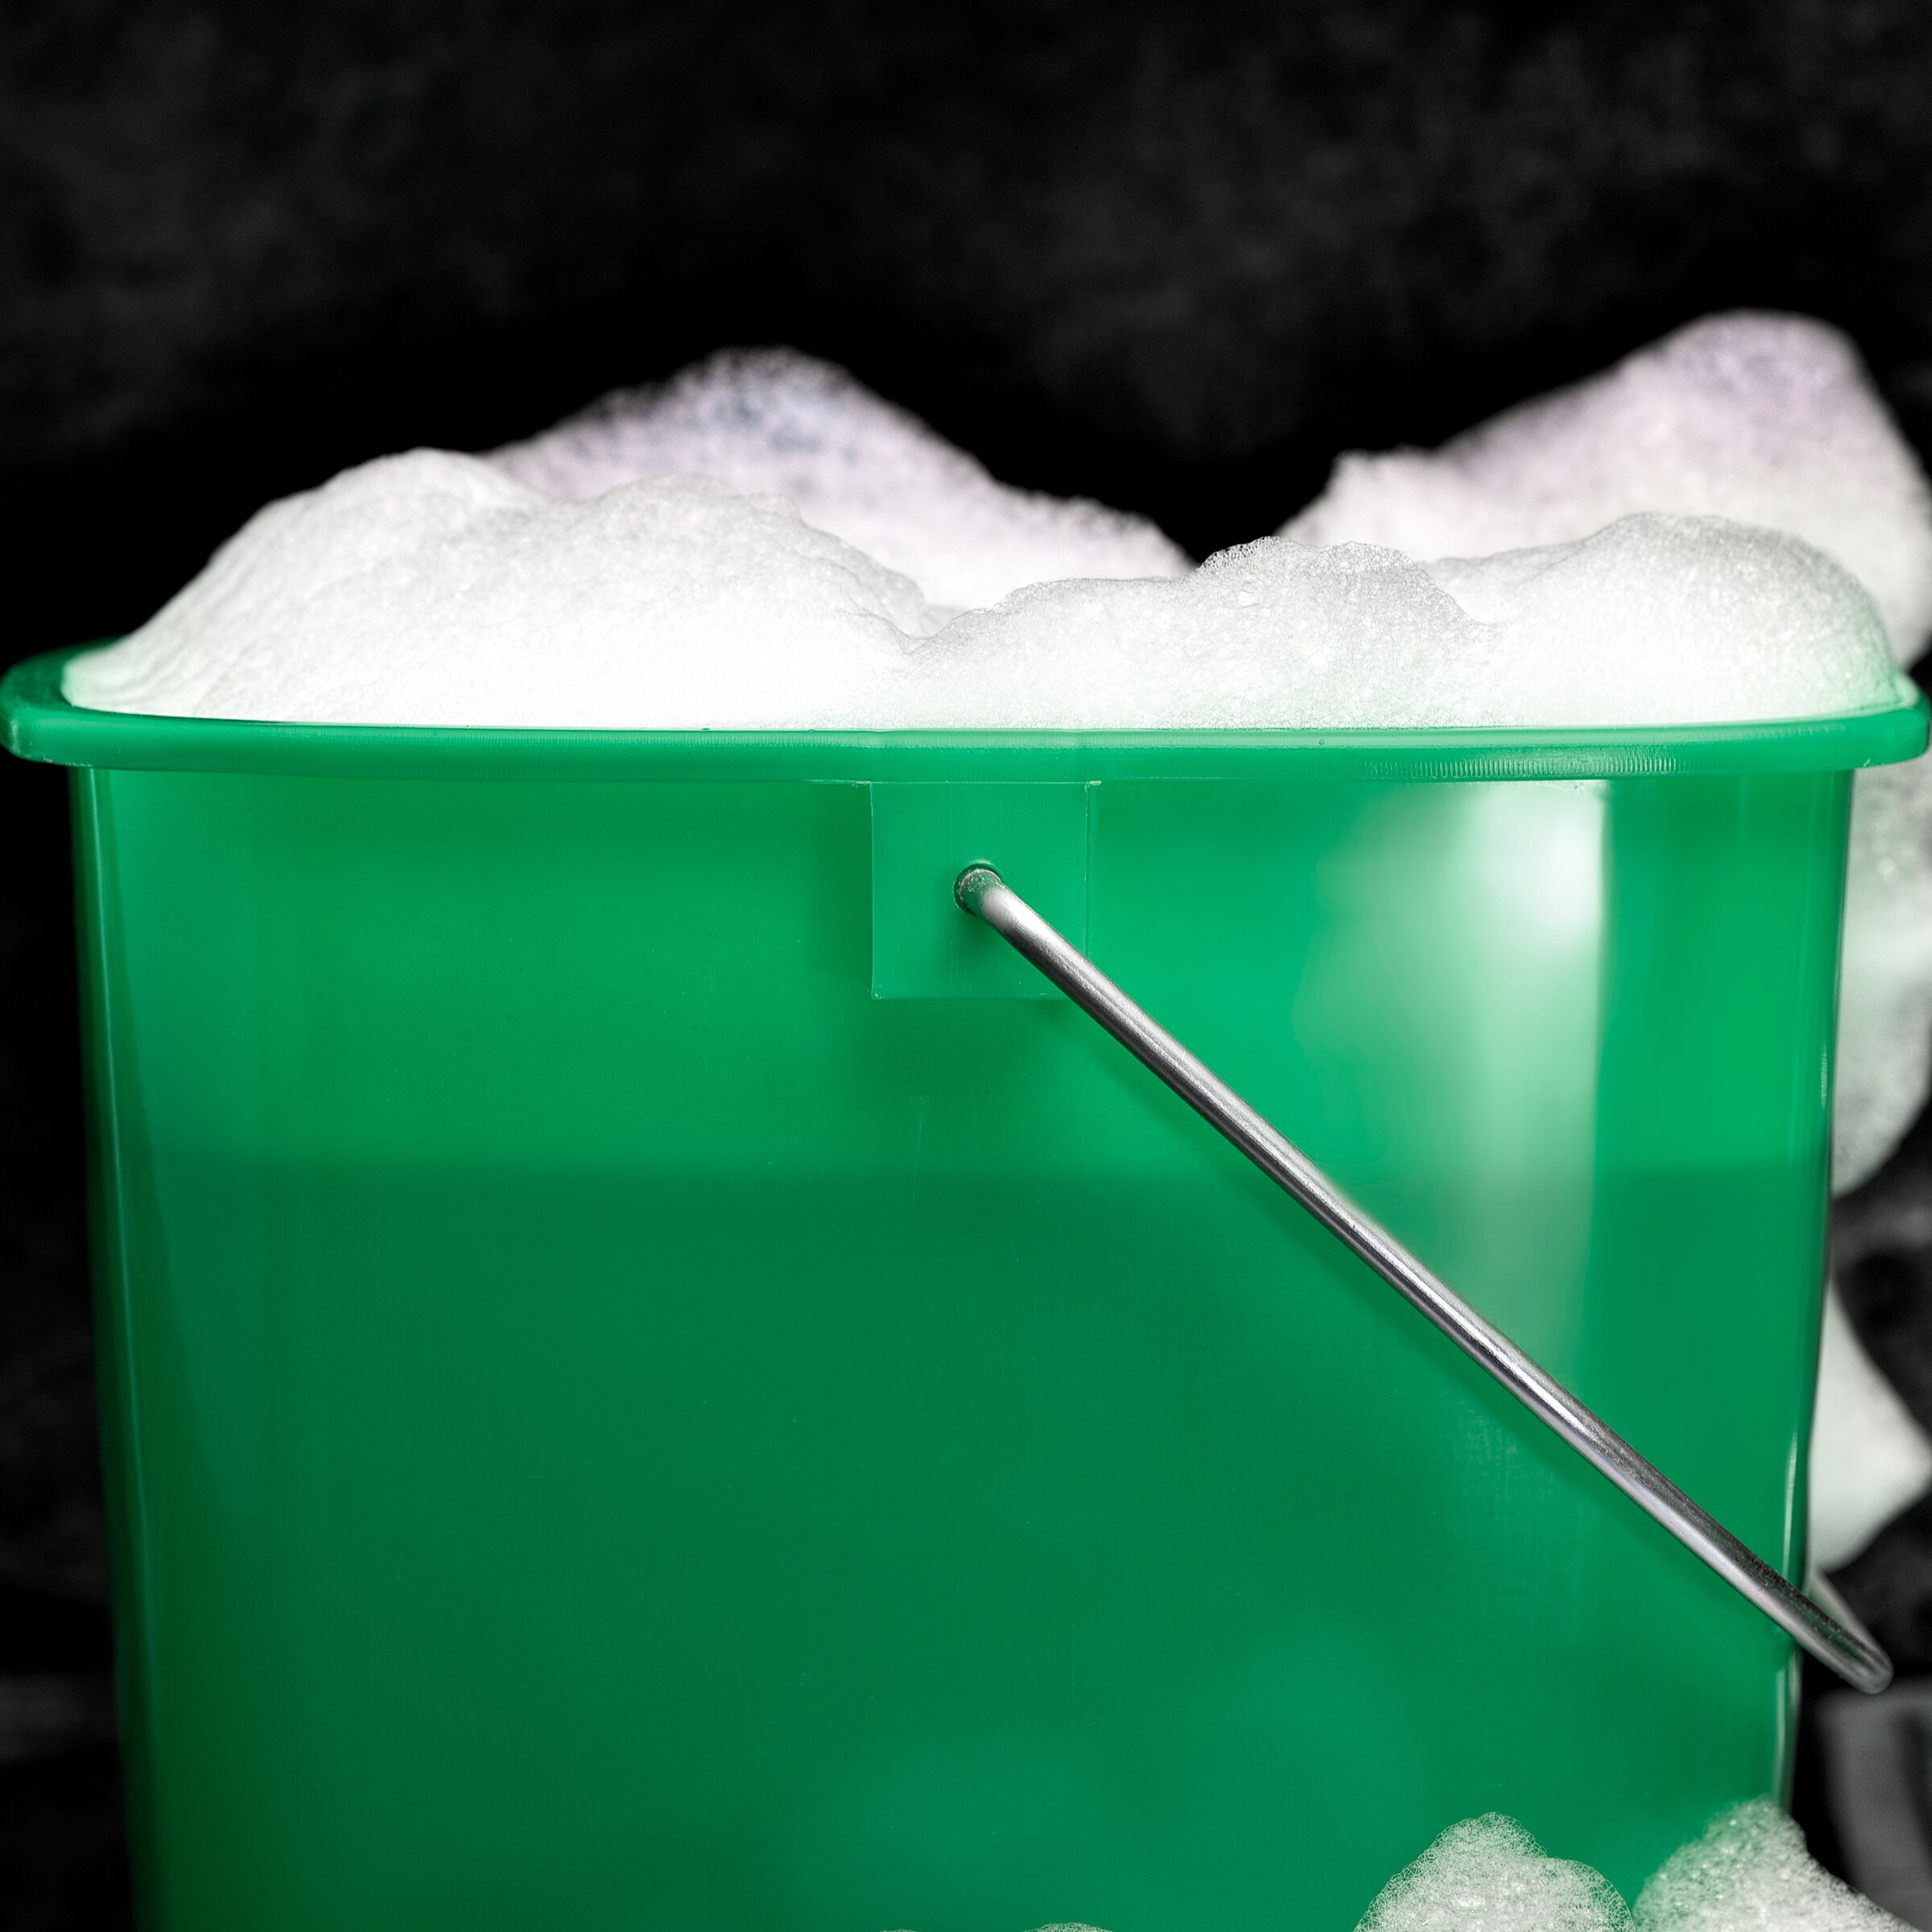 RW Clean 8 Qt Square Green Plastic Cleaning Bucket - with Plastic Handle -  9 3/4 x 9 3/4 x 7 1/2 - 1 count box